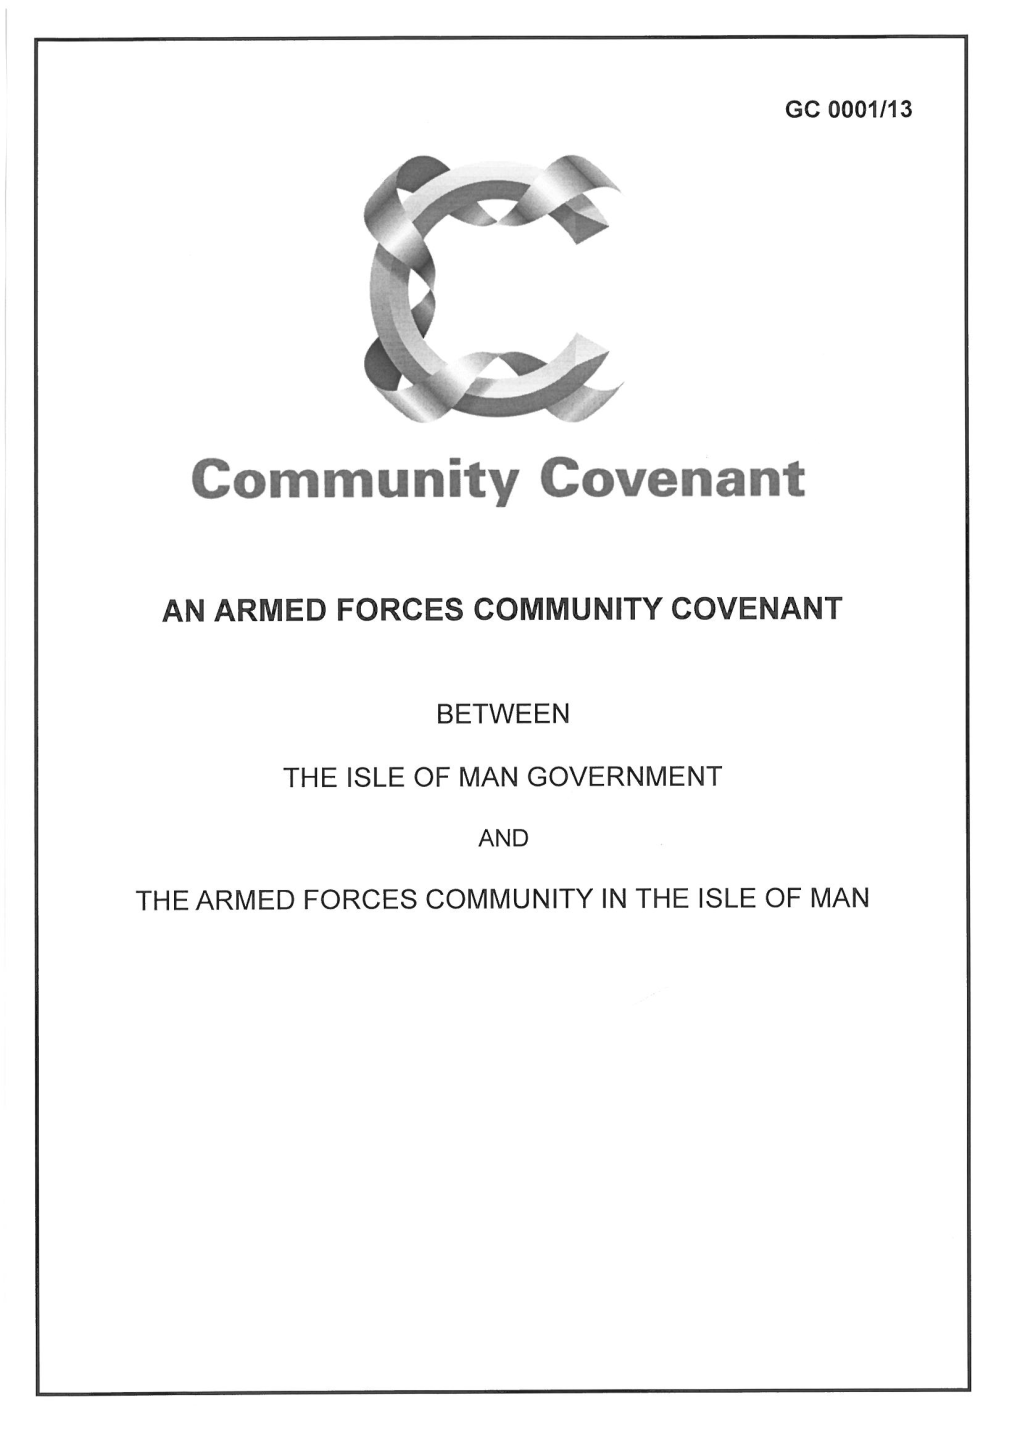 An Armed Forces Community Covenant